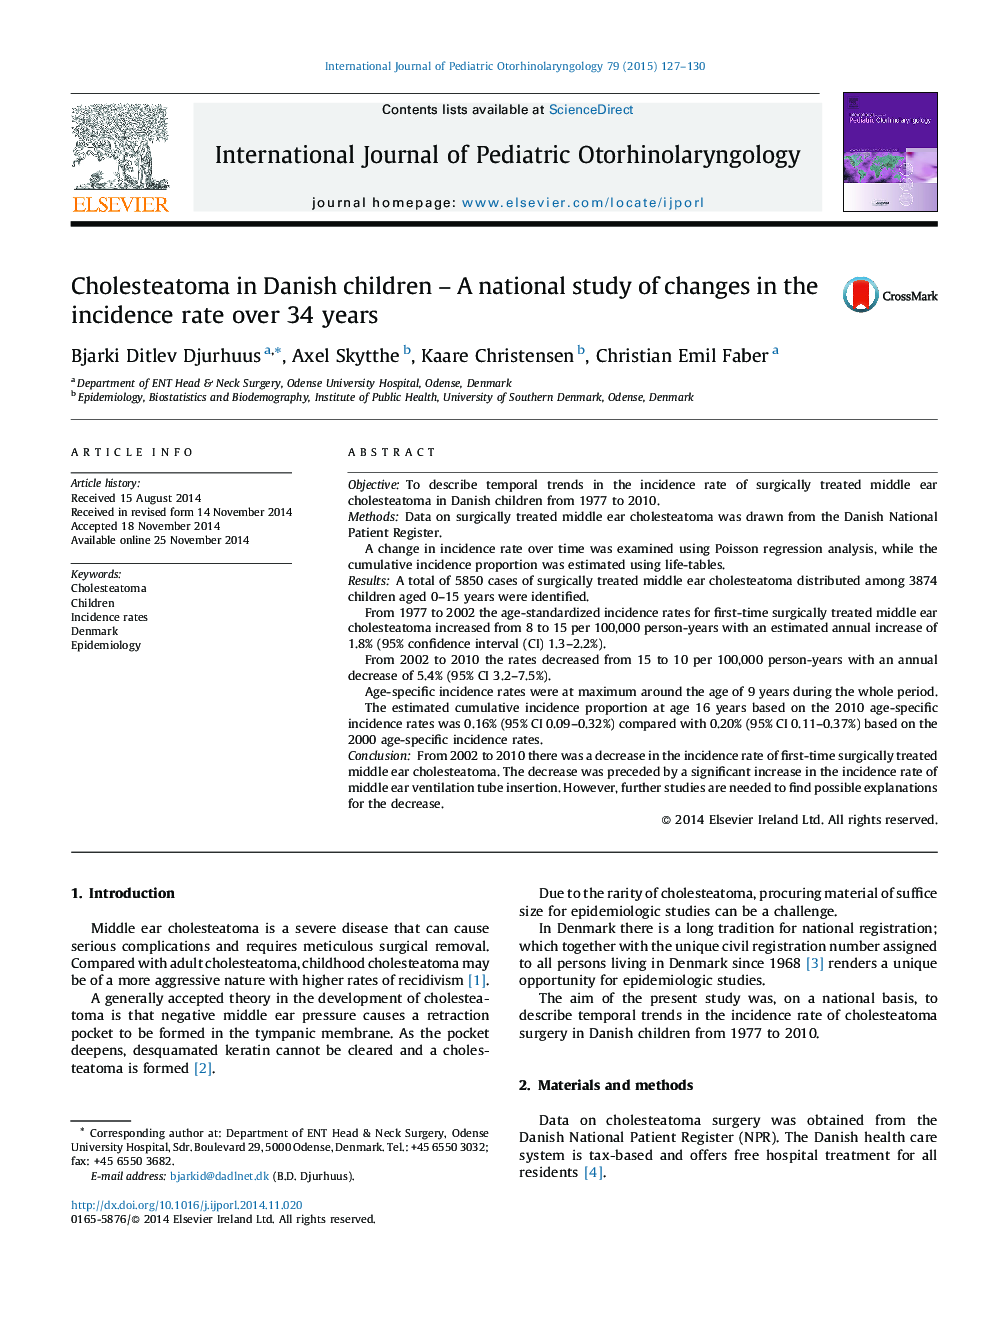 Cholesteatoma in Danish children – A national study of changes in the incidence rate over 34 years